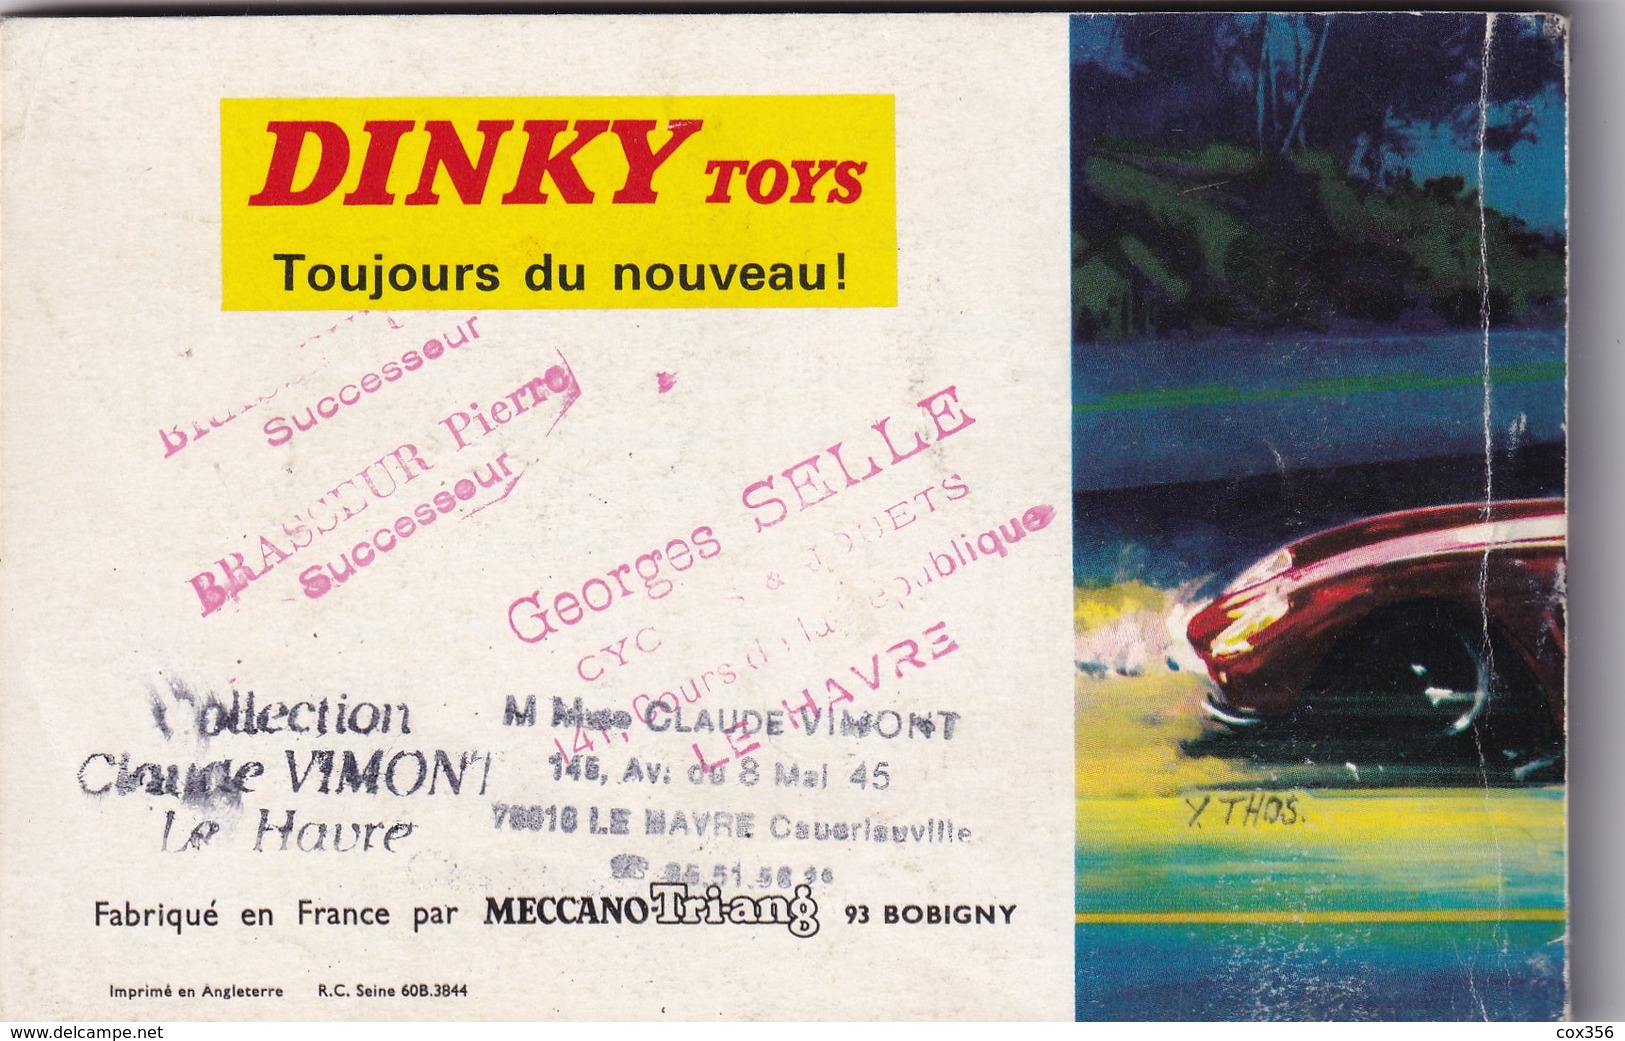 DINKY TOYS CATALOGUE DINKY 1967 - Model Making